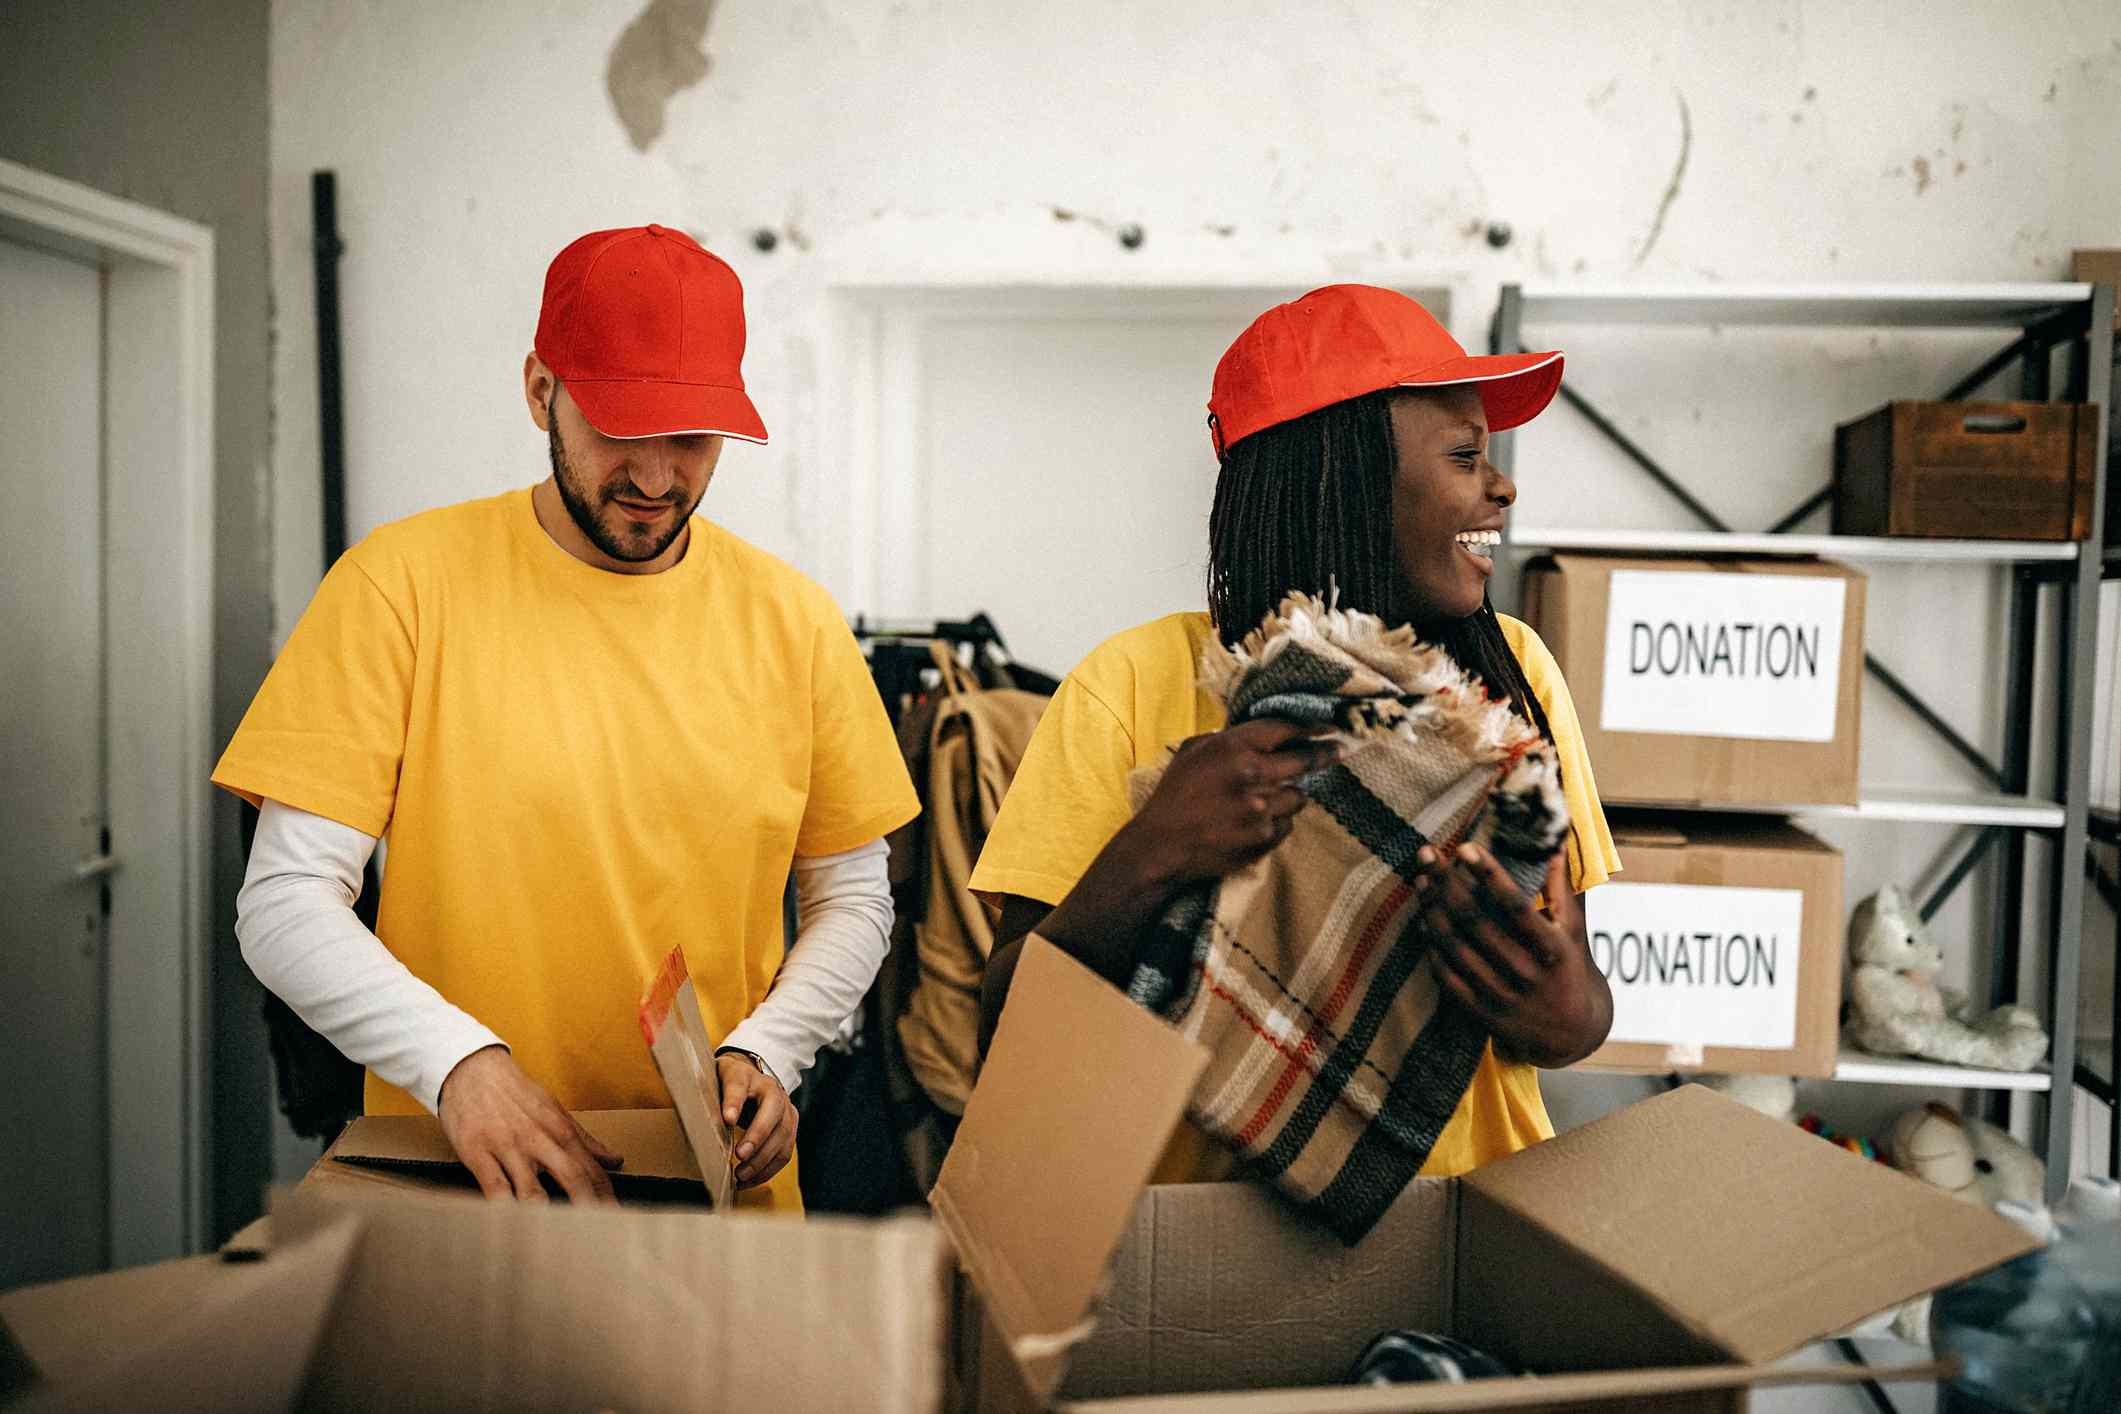 Man and woman in yellow t-shirts and red caps unboxing charity donations